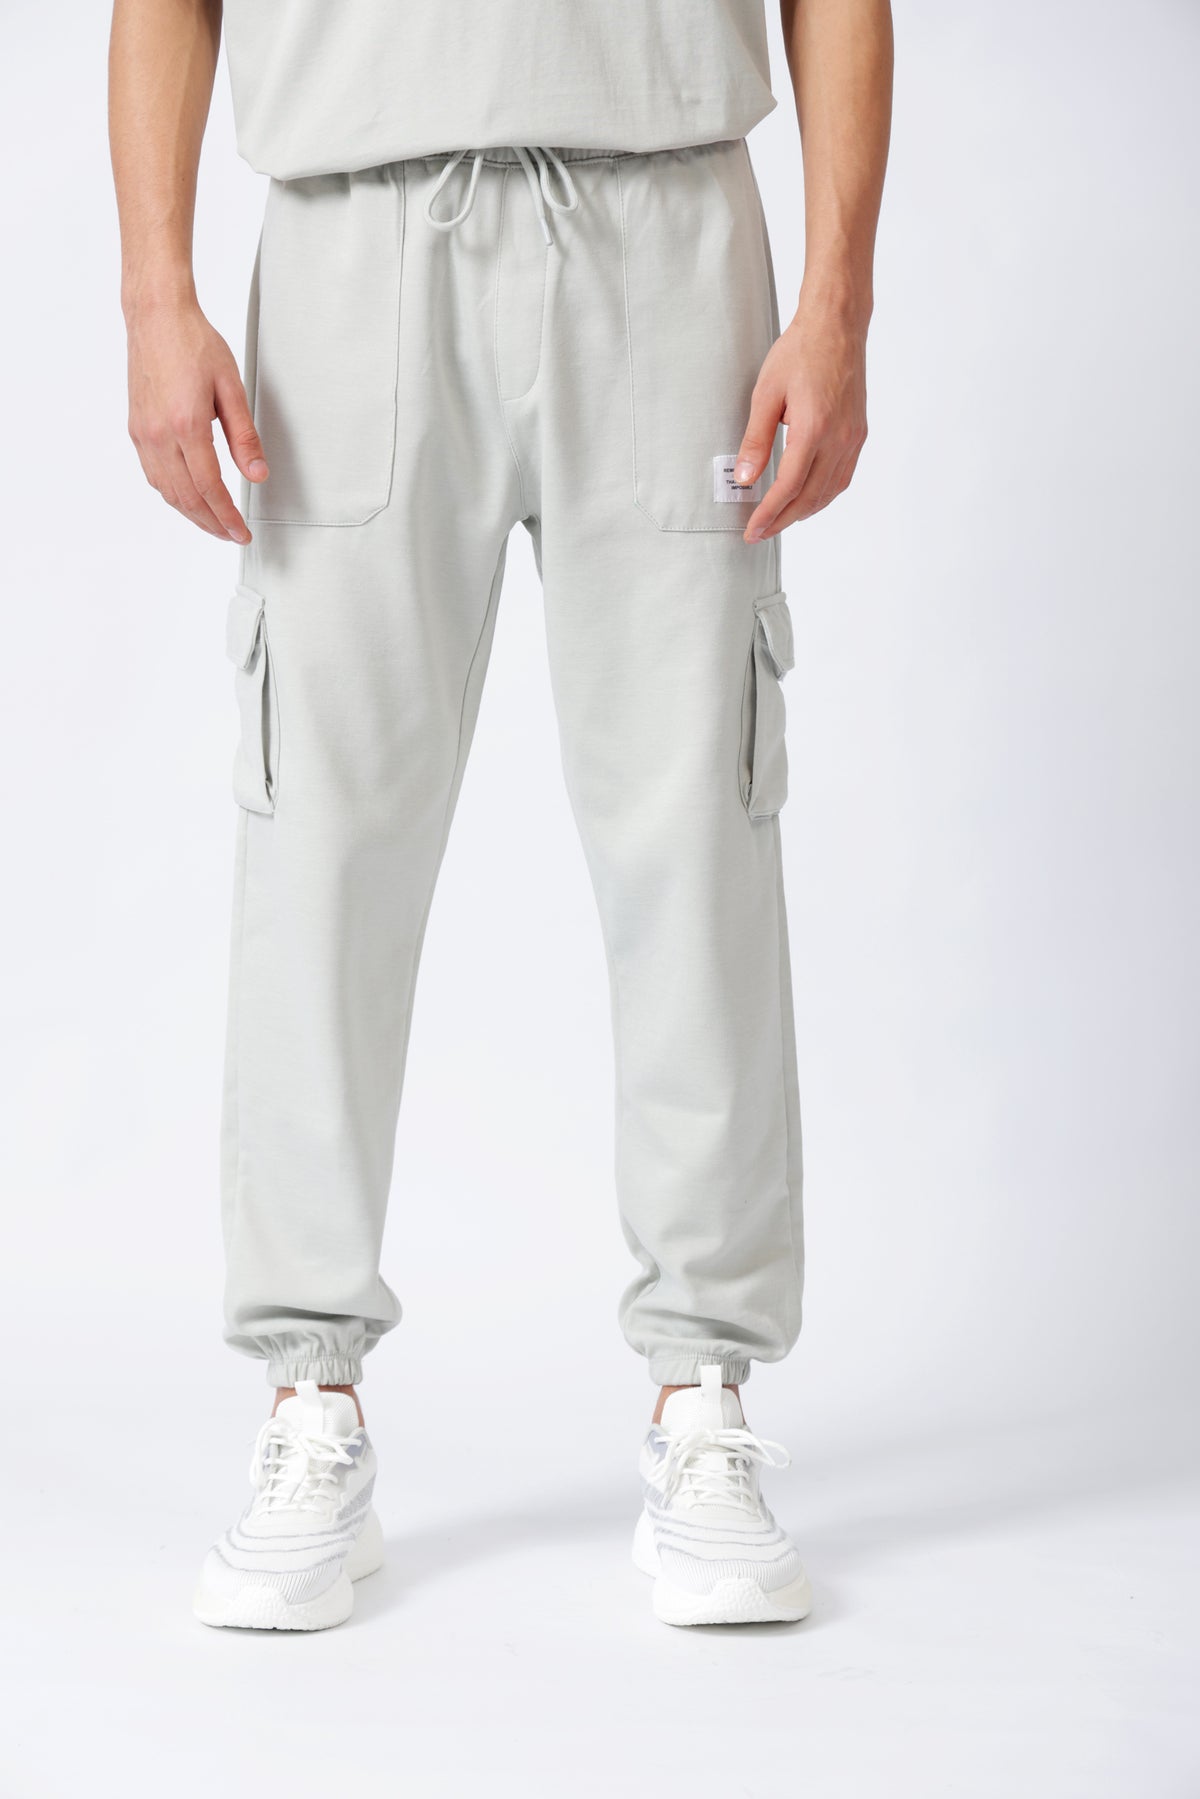 NEW RELAXED FIT KNIT JOGGER